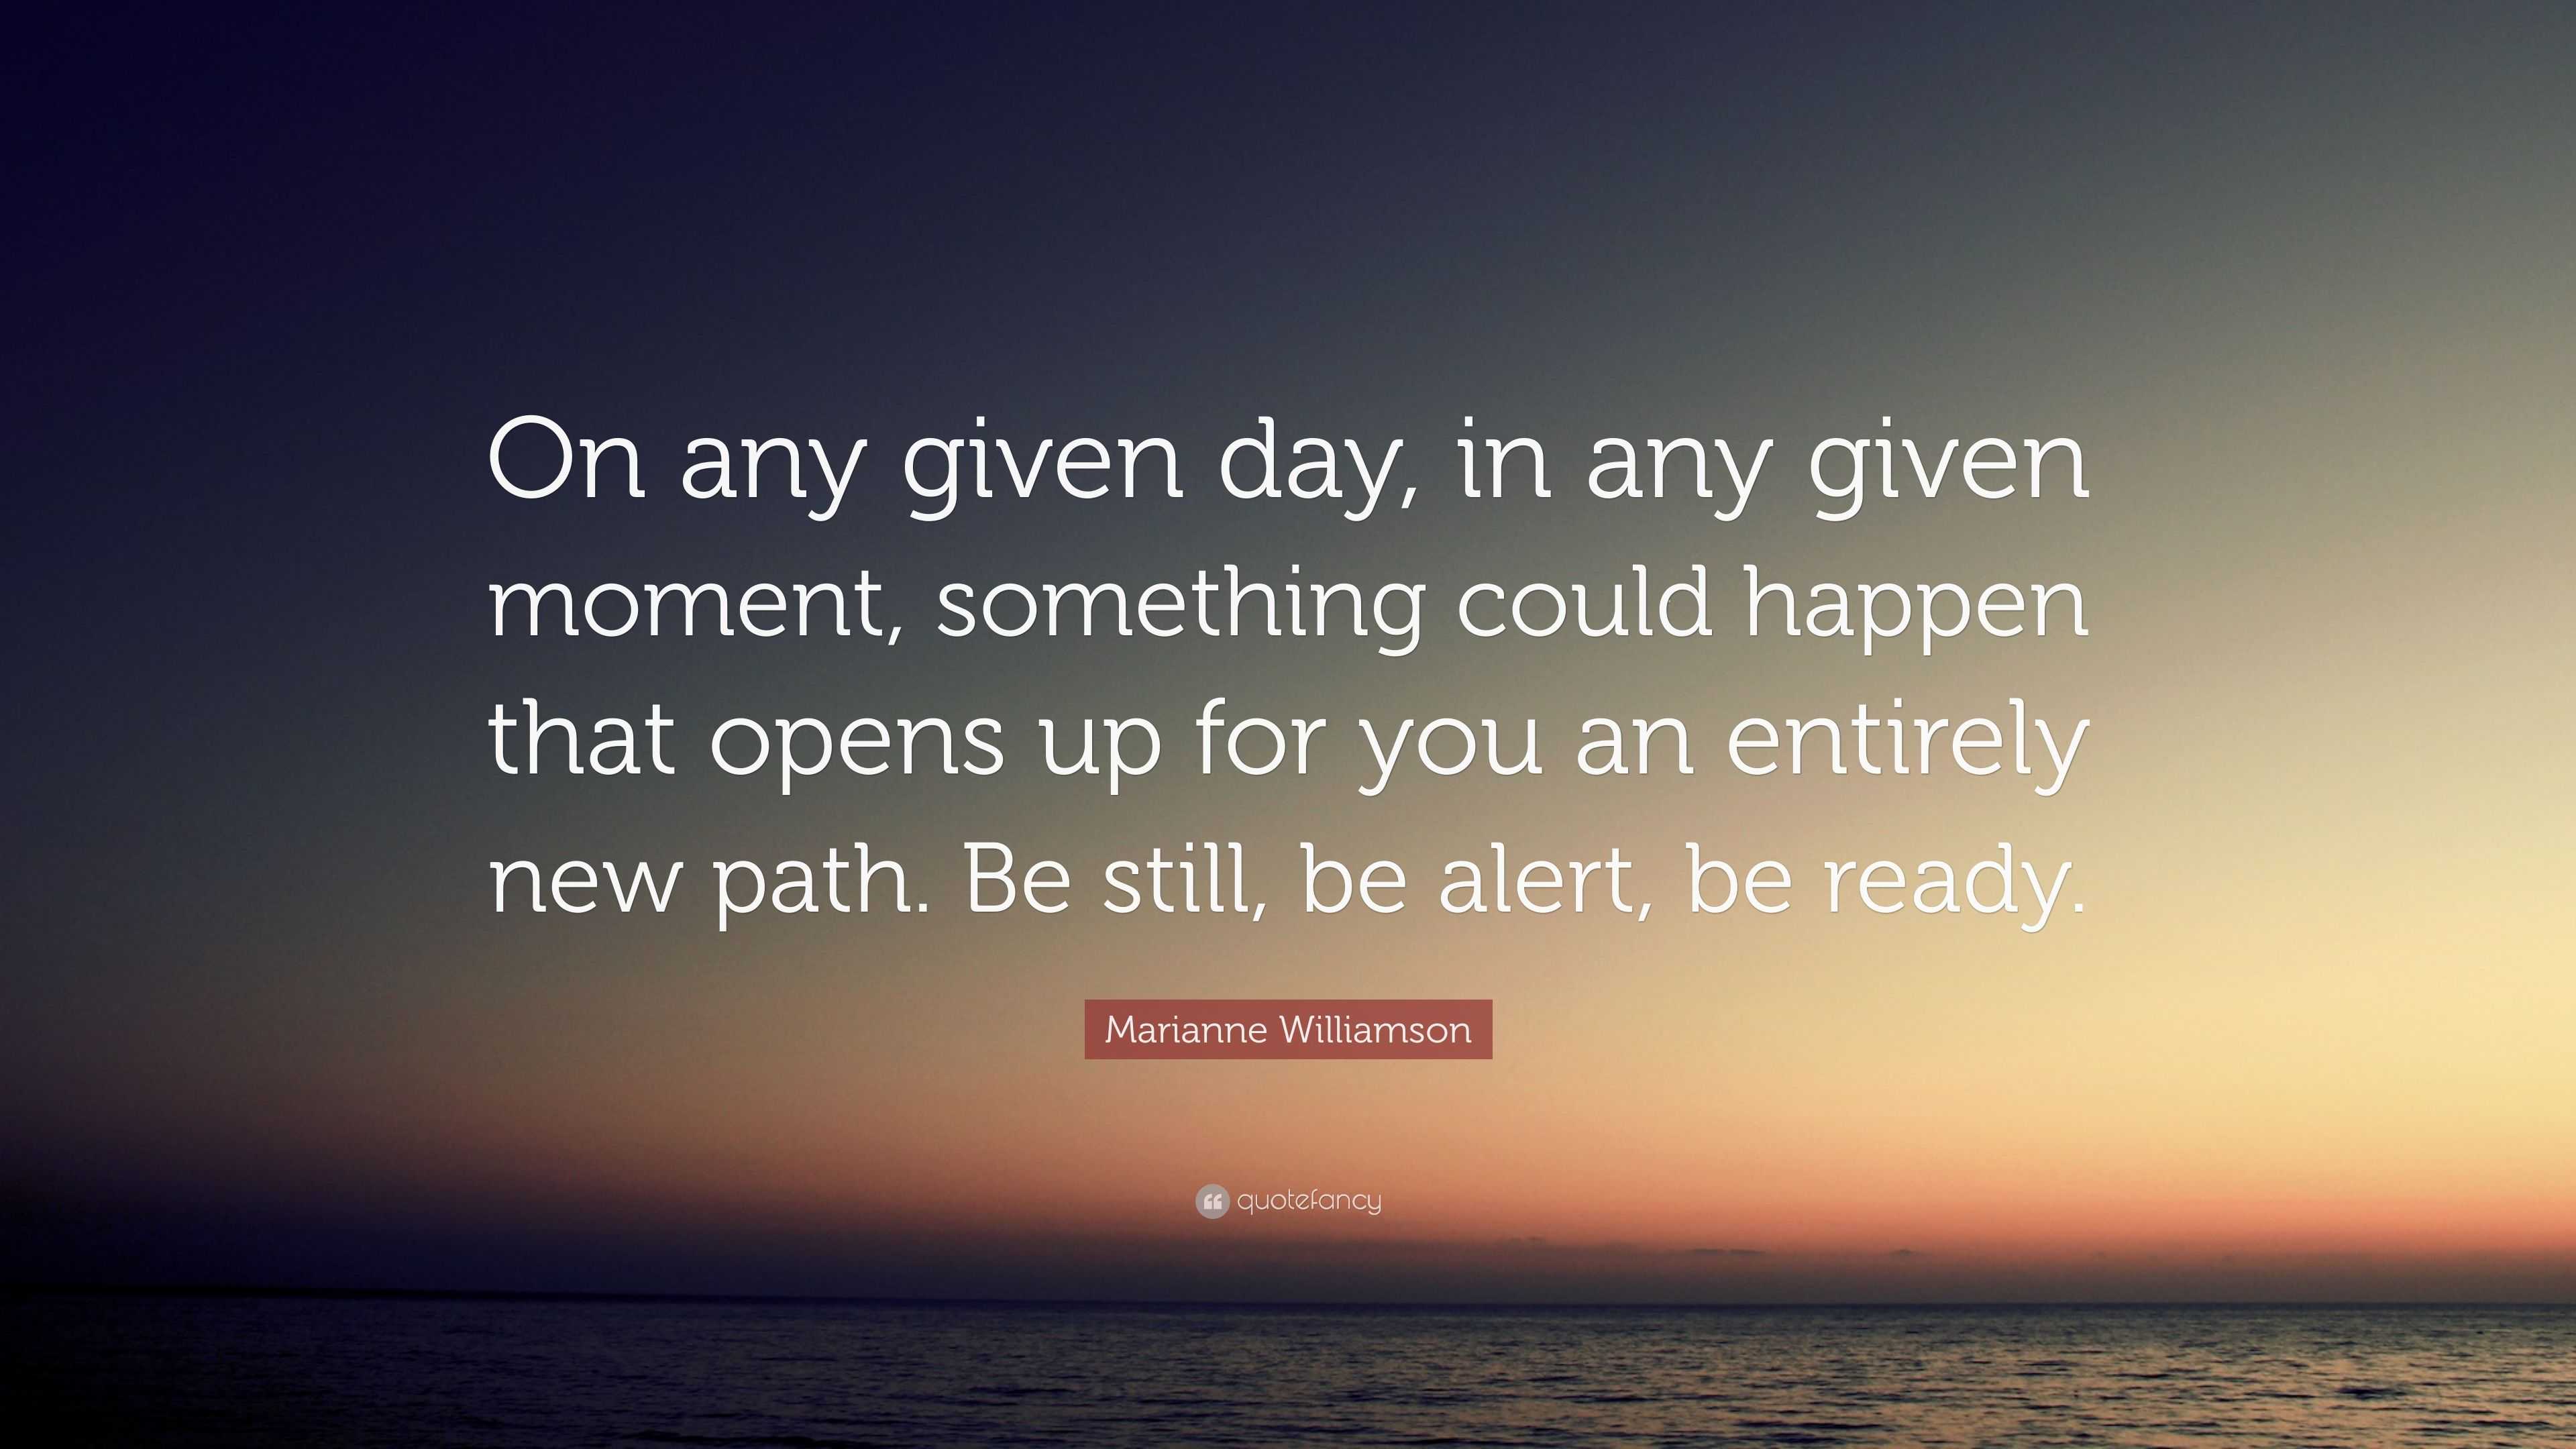 Marianne Williamson Quote: “On any given day, in any given moment ...